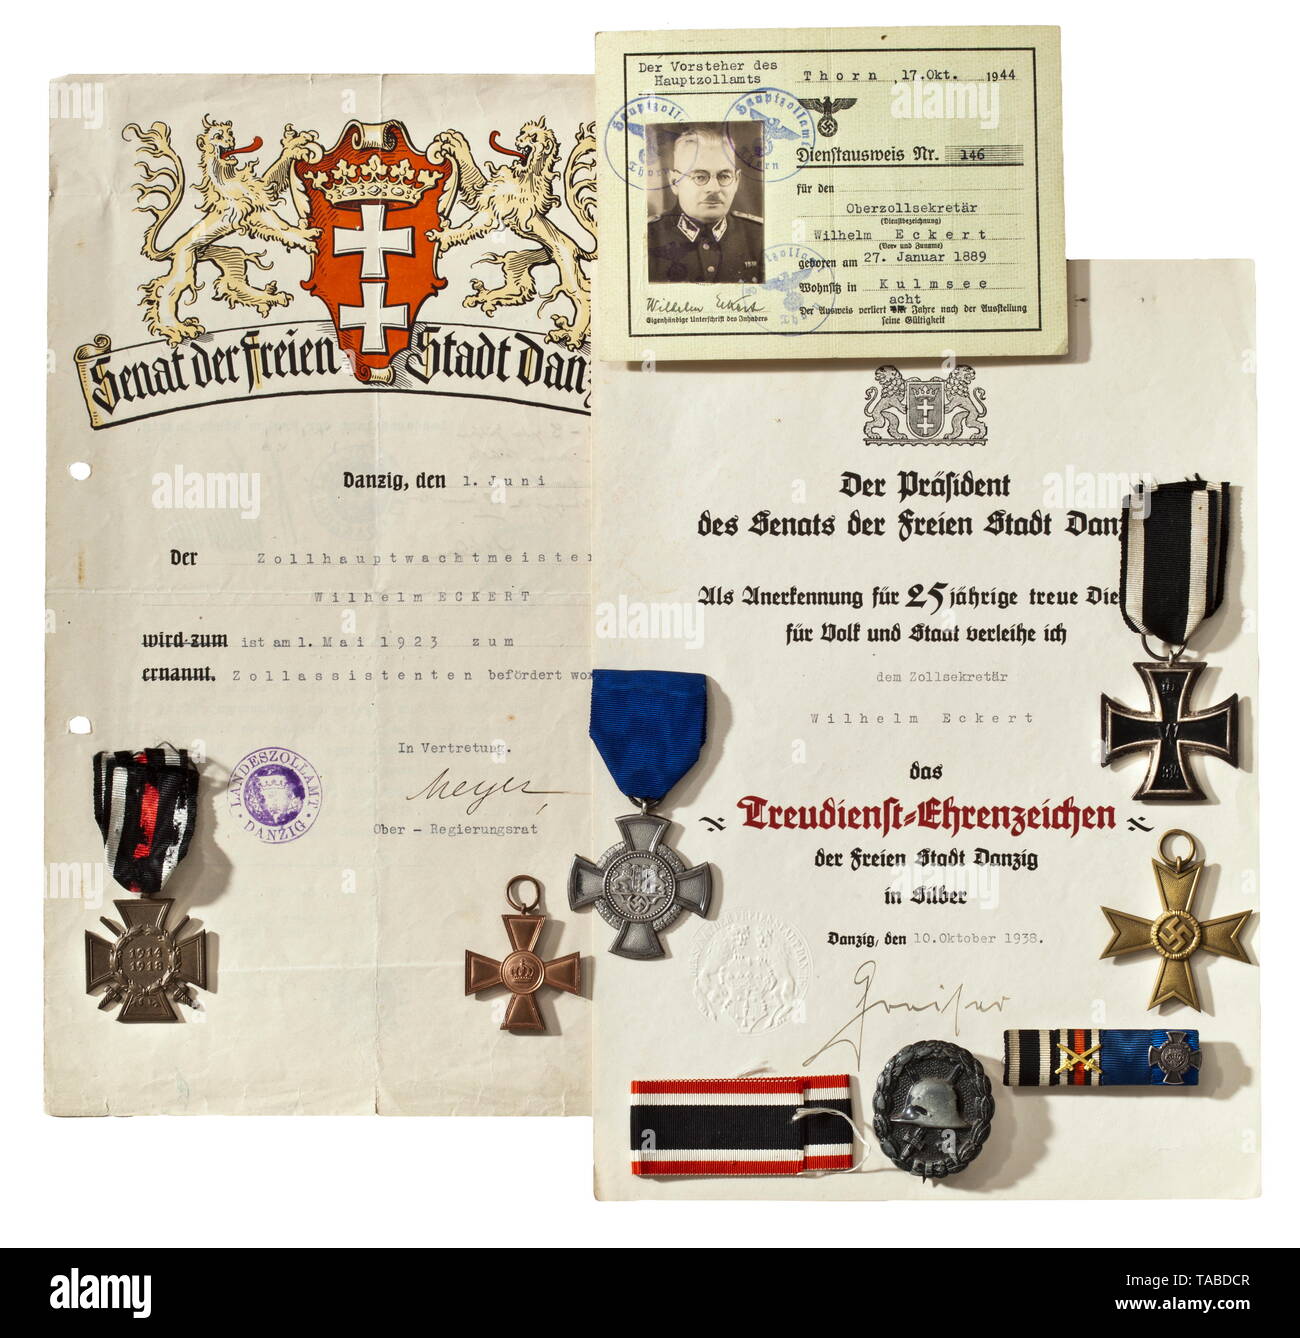 Free City of Danzig - a collection of awards and documents belonging to Wilhelm Eckert, customs secretary (Faithful Service Decoration) The original issue of the Danzig Faithful Service Decoration in Silver, made of silver laminated cupal with polished edges, on the ribbon, with safety pin fastener. Width 45.7 mm. Weight including ribbon 22.8 g. Also, the A 4-sized award document, printed in colour on carton with the blind embossed seal of the Senate of the Free City of Danzig. Issued 10 October 1938 to 'Zollsekretär Wilhelm Eckert' and bearing the original signature of Sen, Editorial-Use-Only Stock Photo